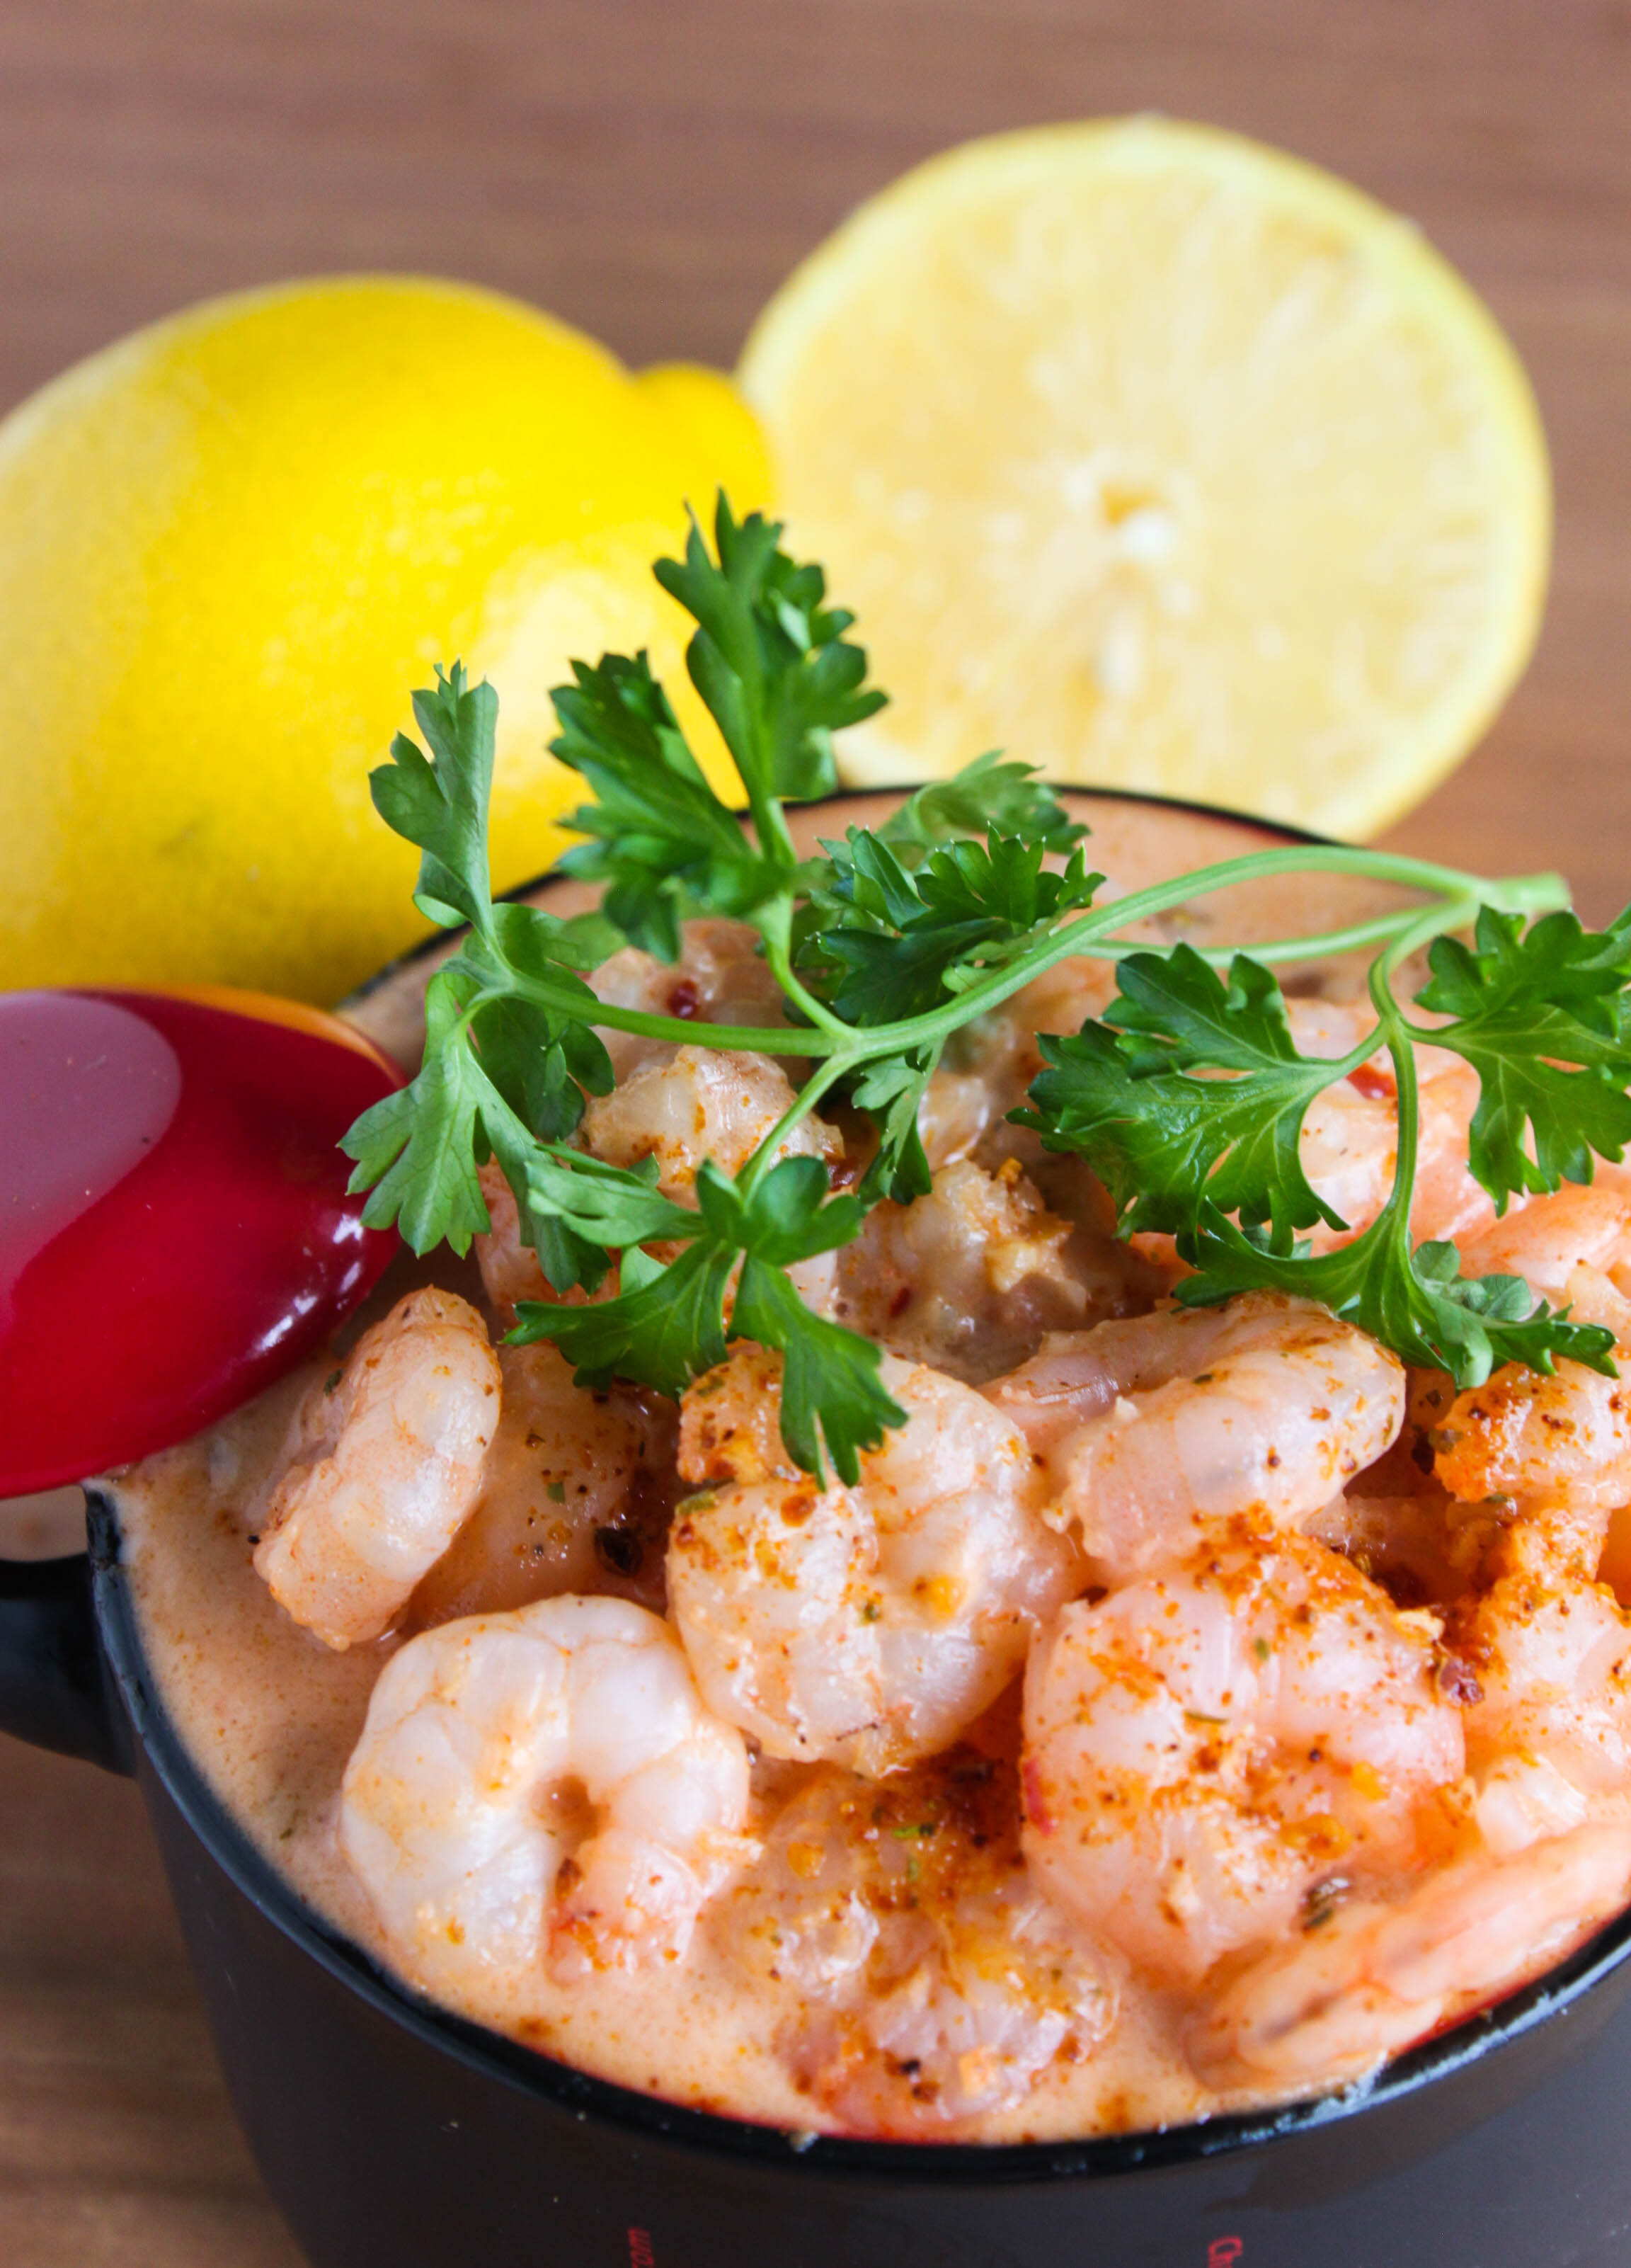 Spicy Shrimp in a Creamy Seafood Sauce